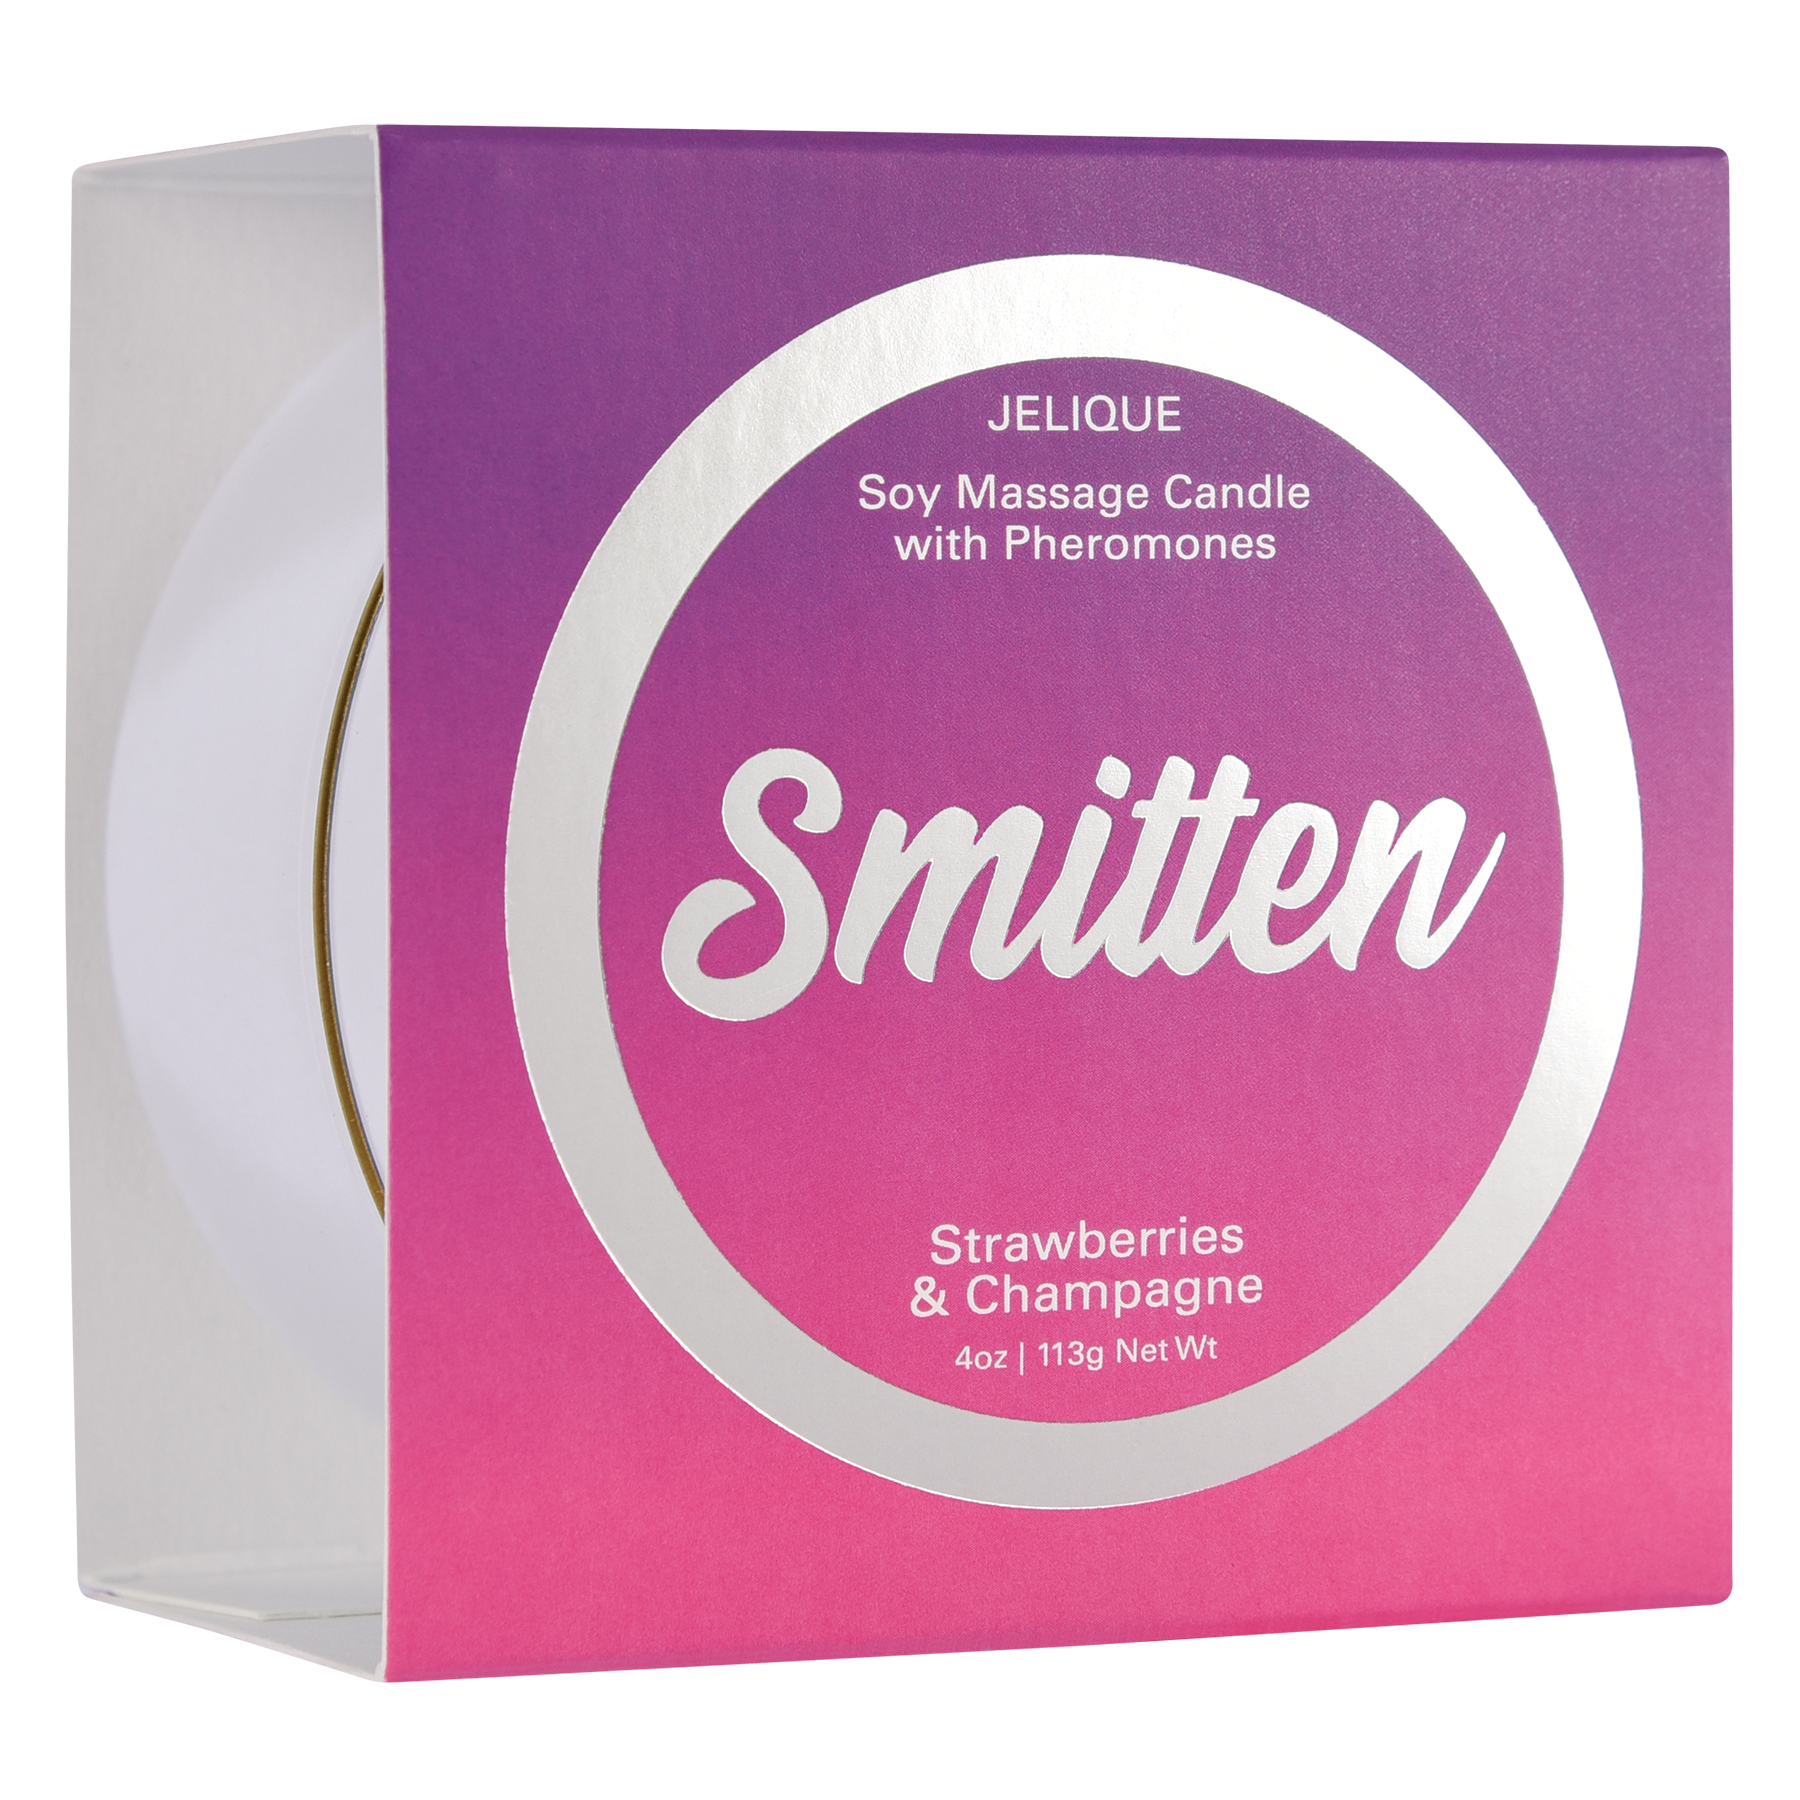 SOY MASSAGE CANDLE SMITTEN STRAWBERRIES & CHAMPAGNE 4 FL OZ